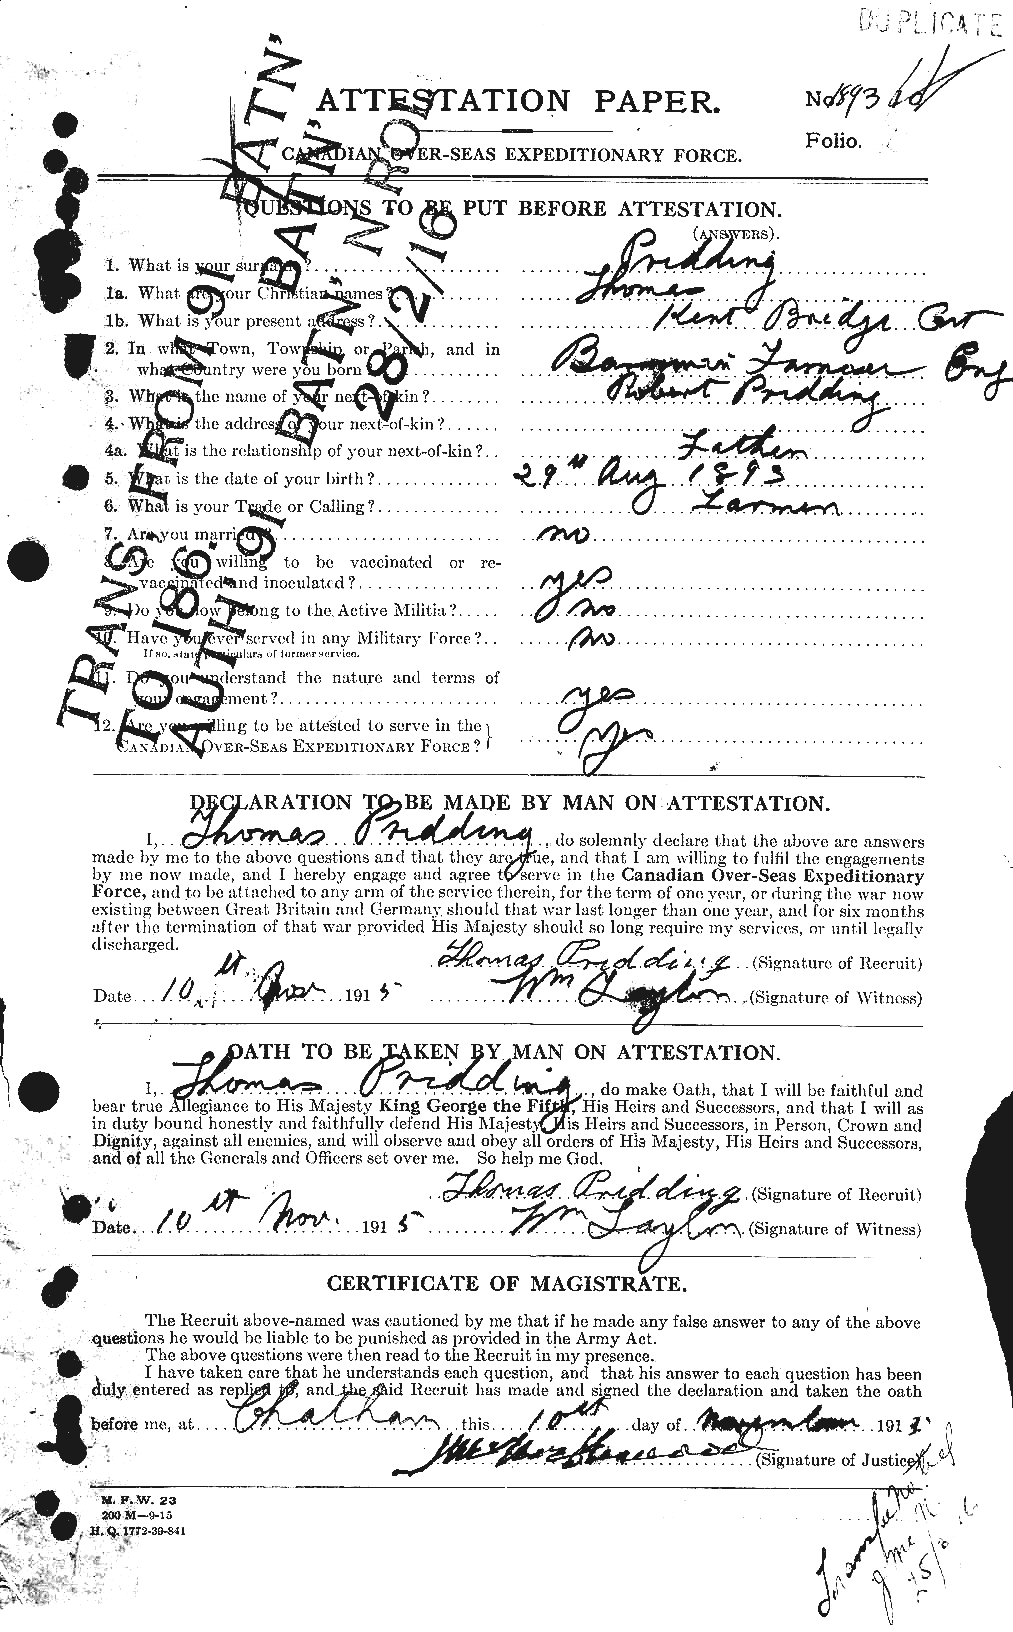 Personnel Records of the First World War - CEF 587483a